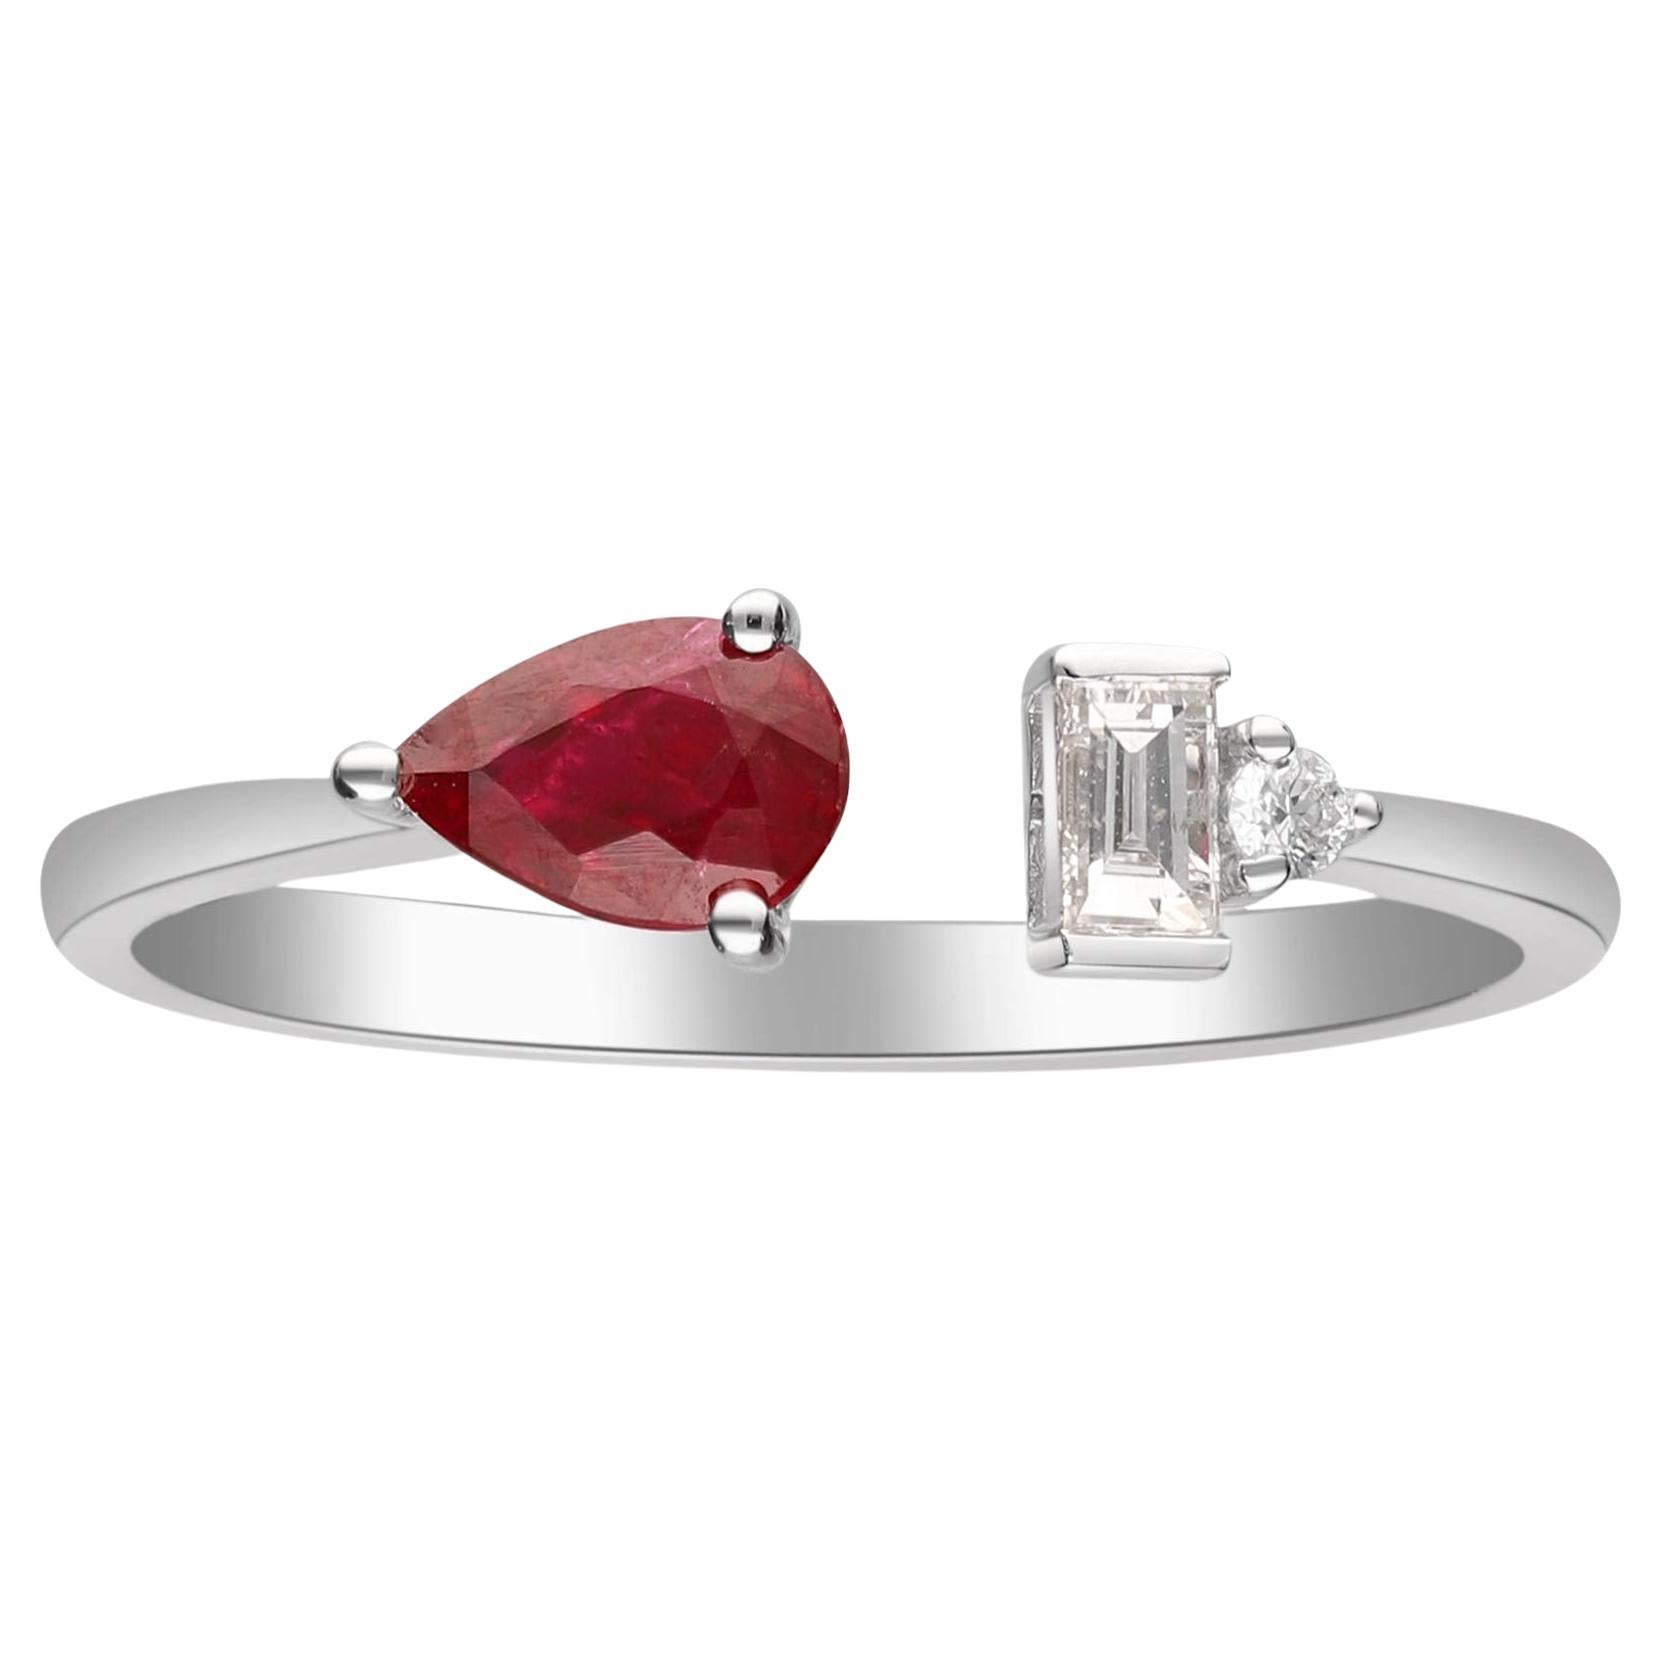 0.55 Carat Pear-Cut Ruby with Diamond Accents 18K White Gold Ring